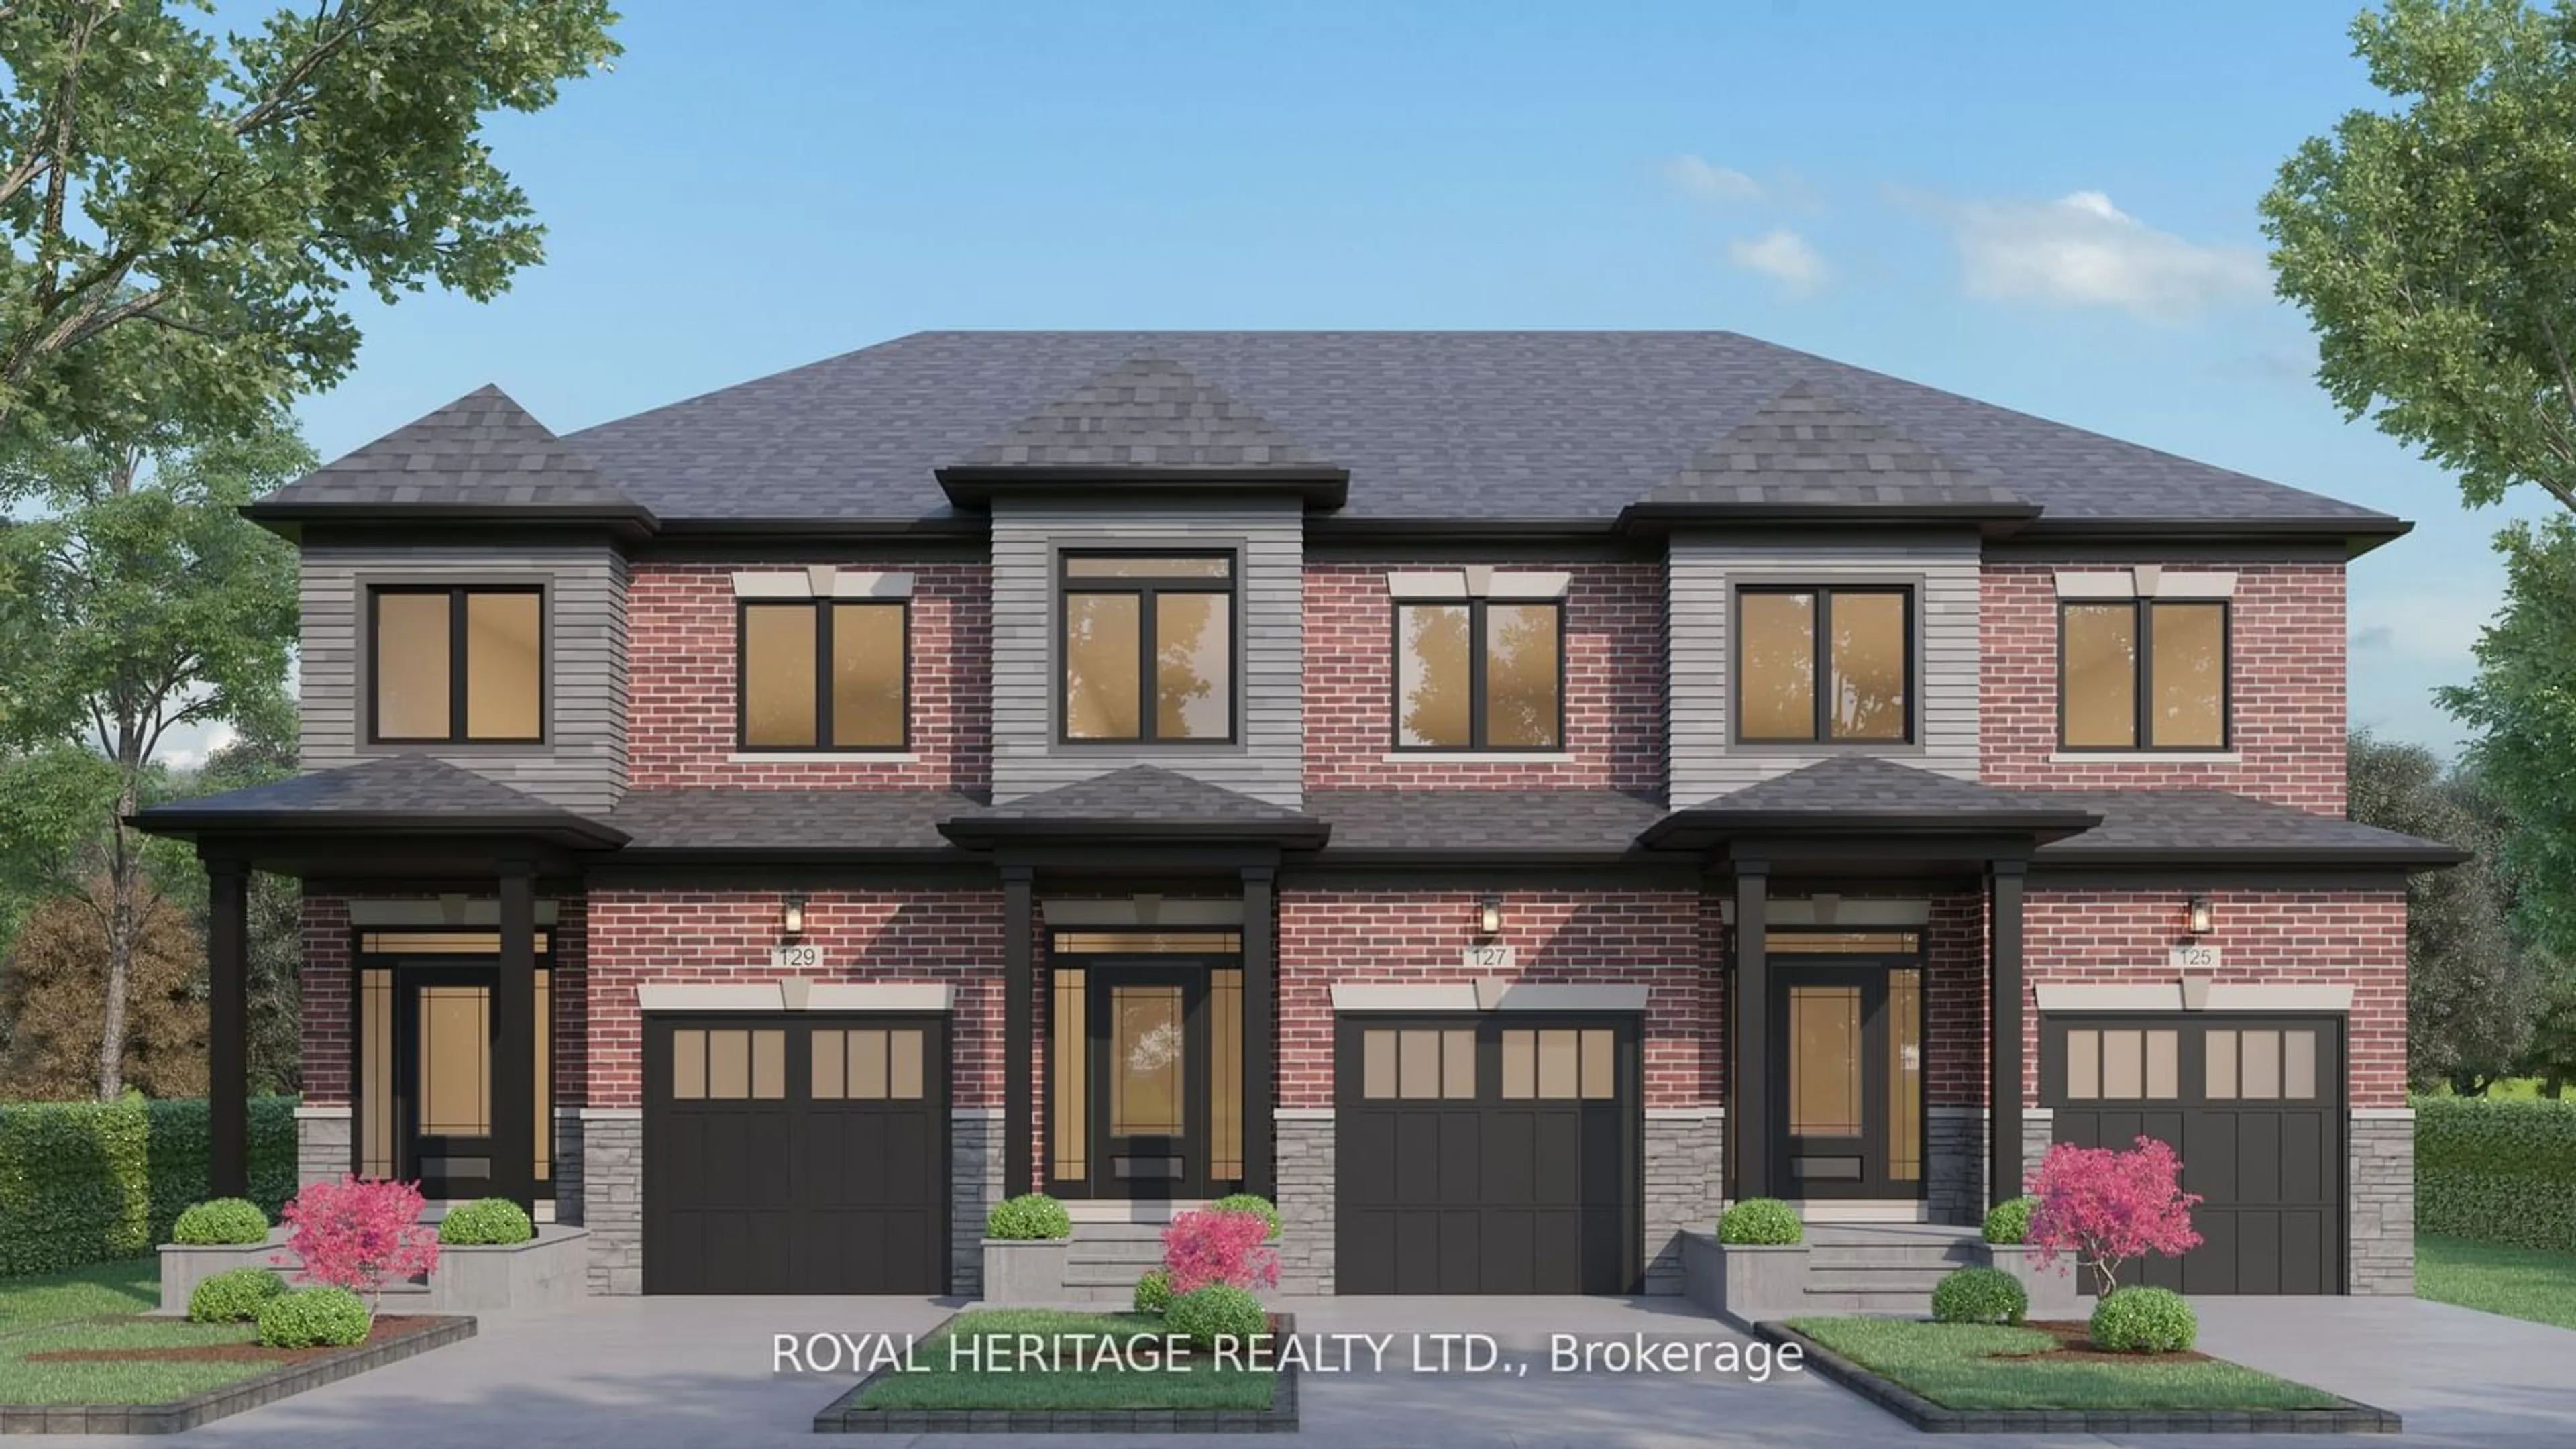 Home with brick exterior material for 129 Hickory St, Whitby Ontario L1N 3X6